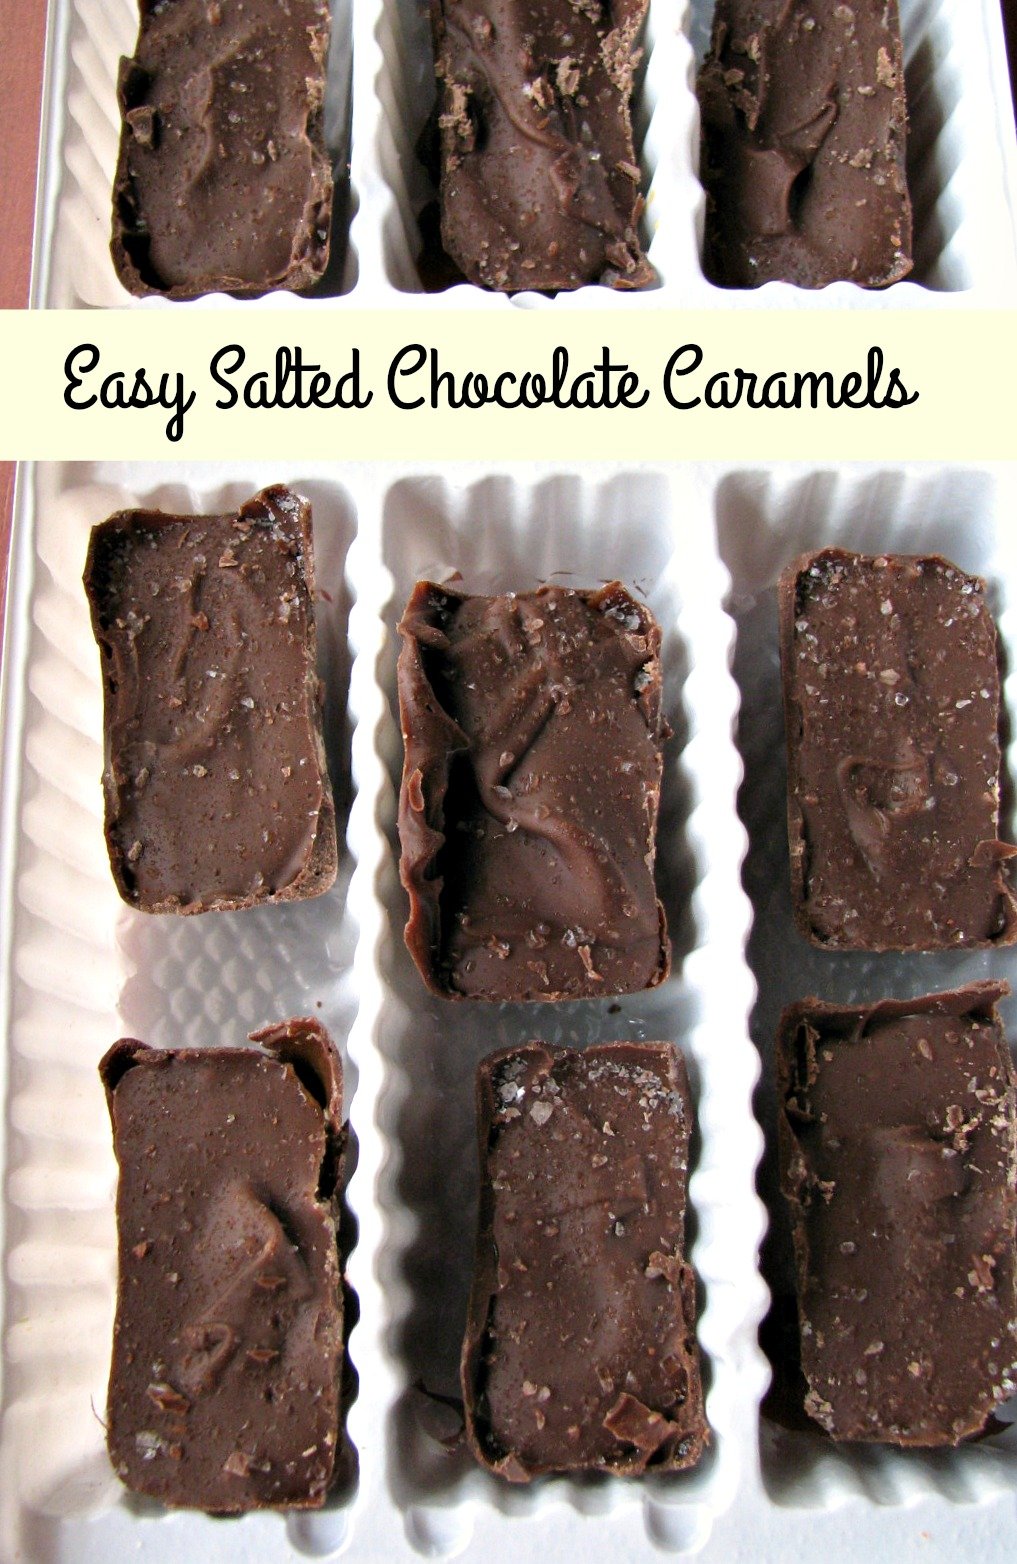 Make these Easy Salted Chocolate Caramels today! Made with melted chocolate chips and store-bought caramel topping, they are the perfect Christmas gift, if you can stop yourself from eating them all first!